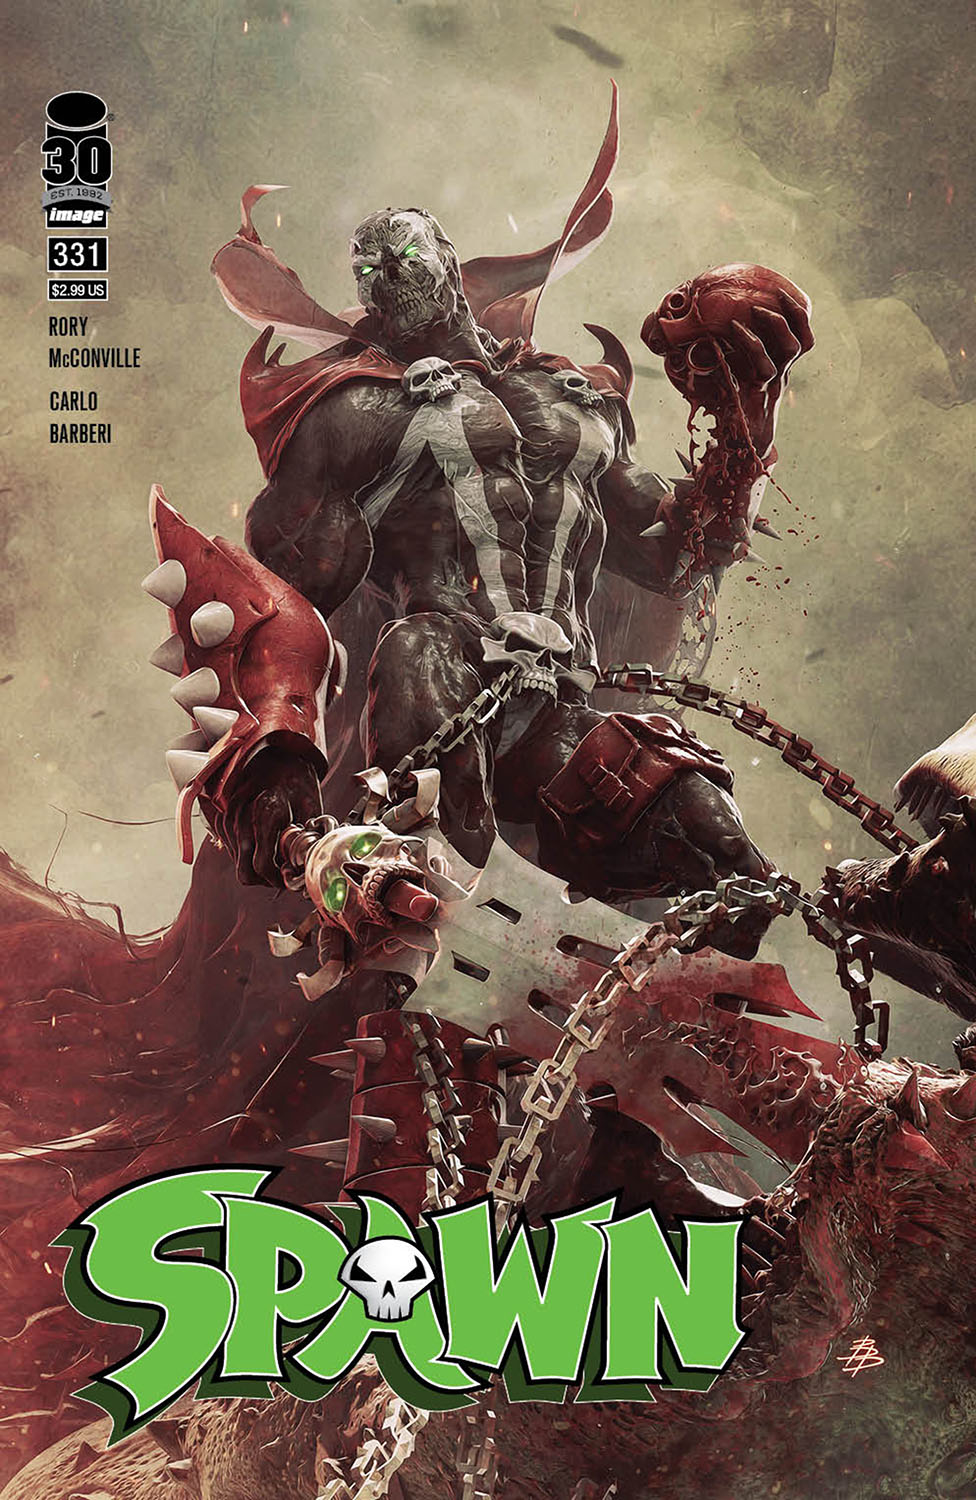 Spawn #331 Cover A Barends (1992)